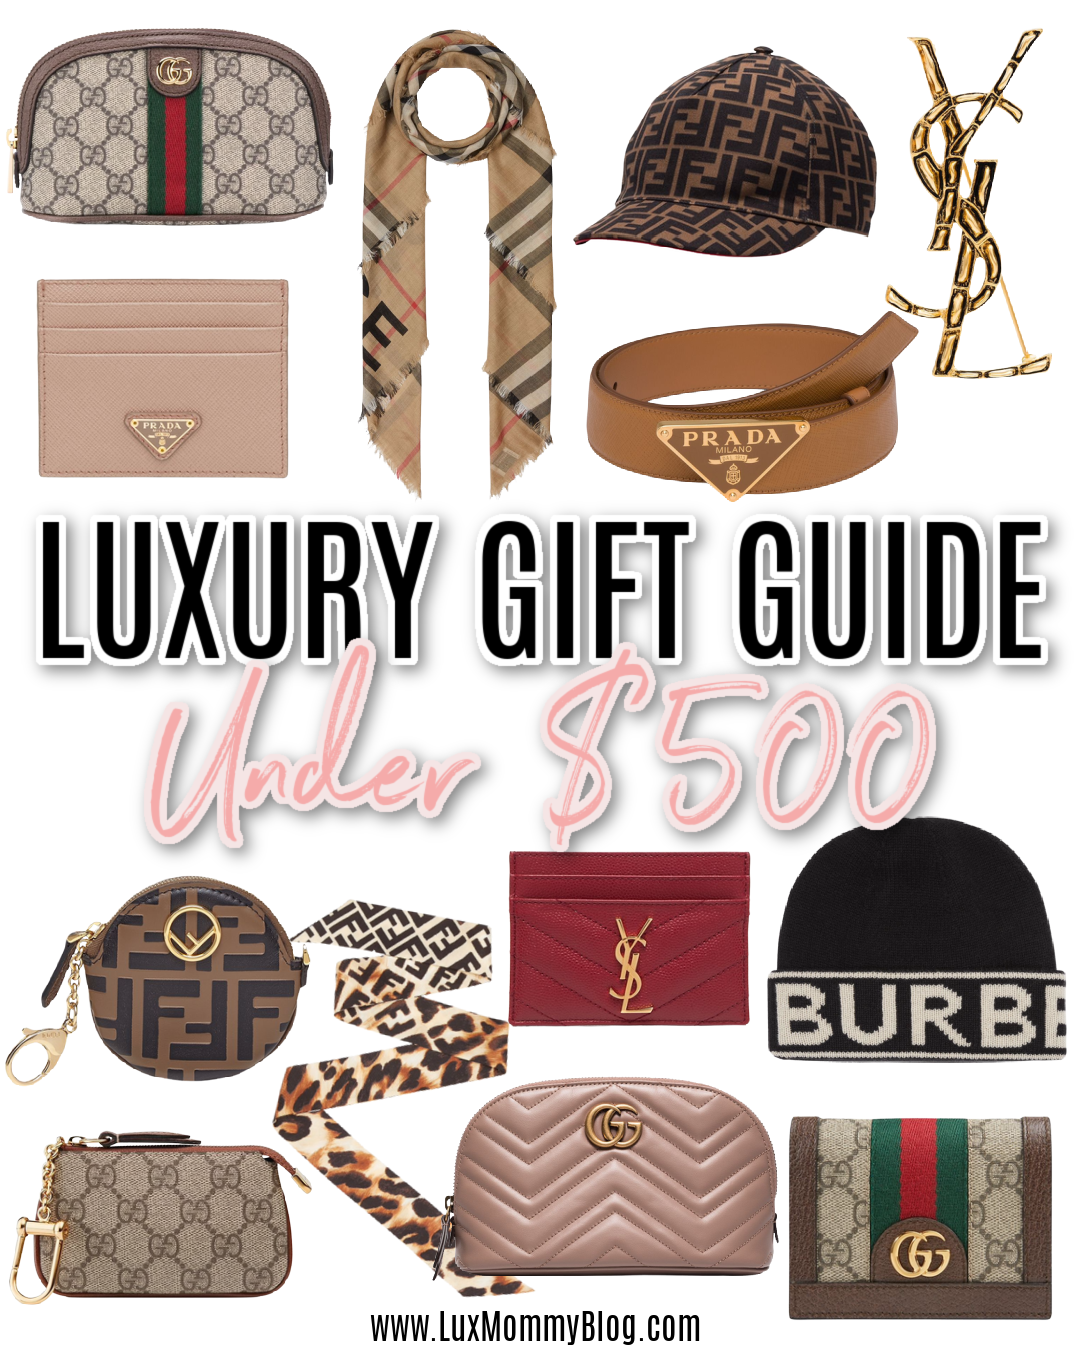 Holiday Gift Guide | For Him | Gift guide for him, Sweet gift ideas,  Favorite things gift